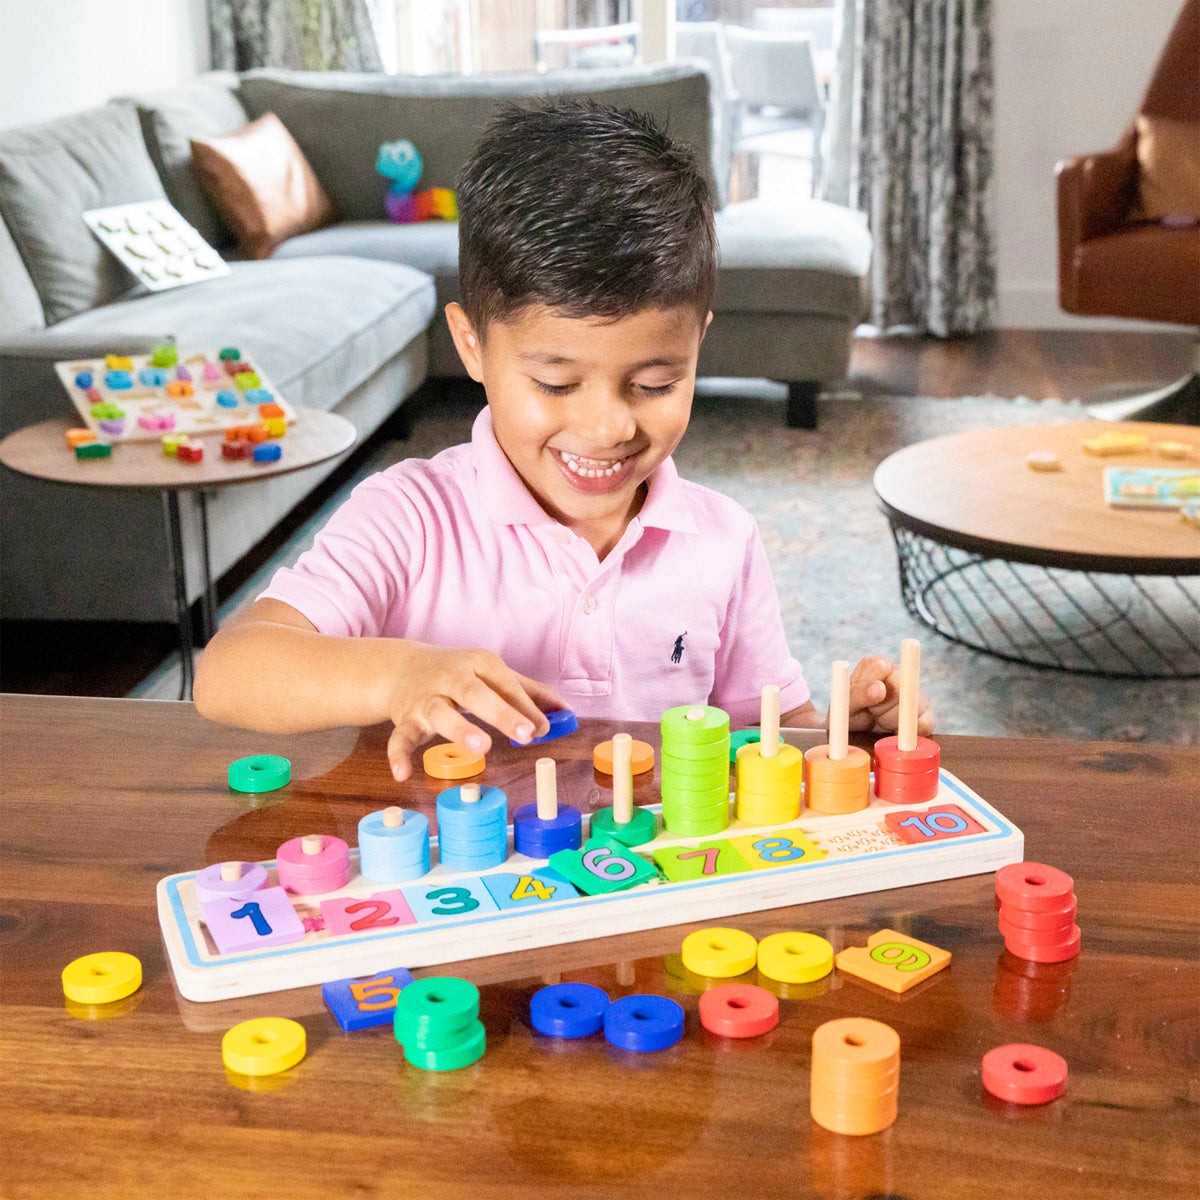 New Classic Toys Learn To Count Educational Wooden Toy